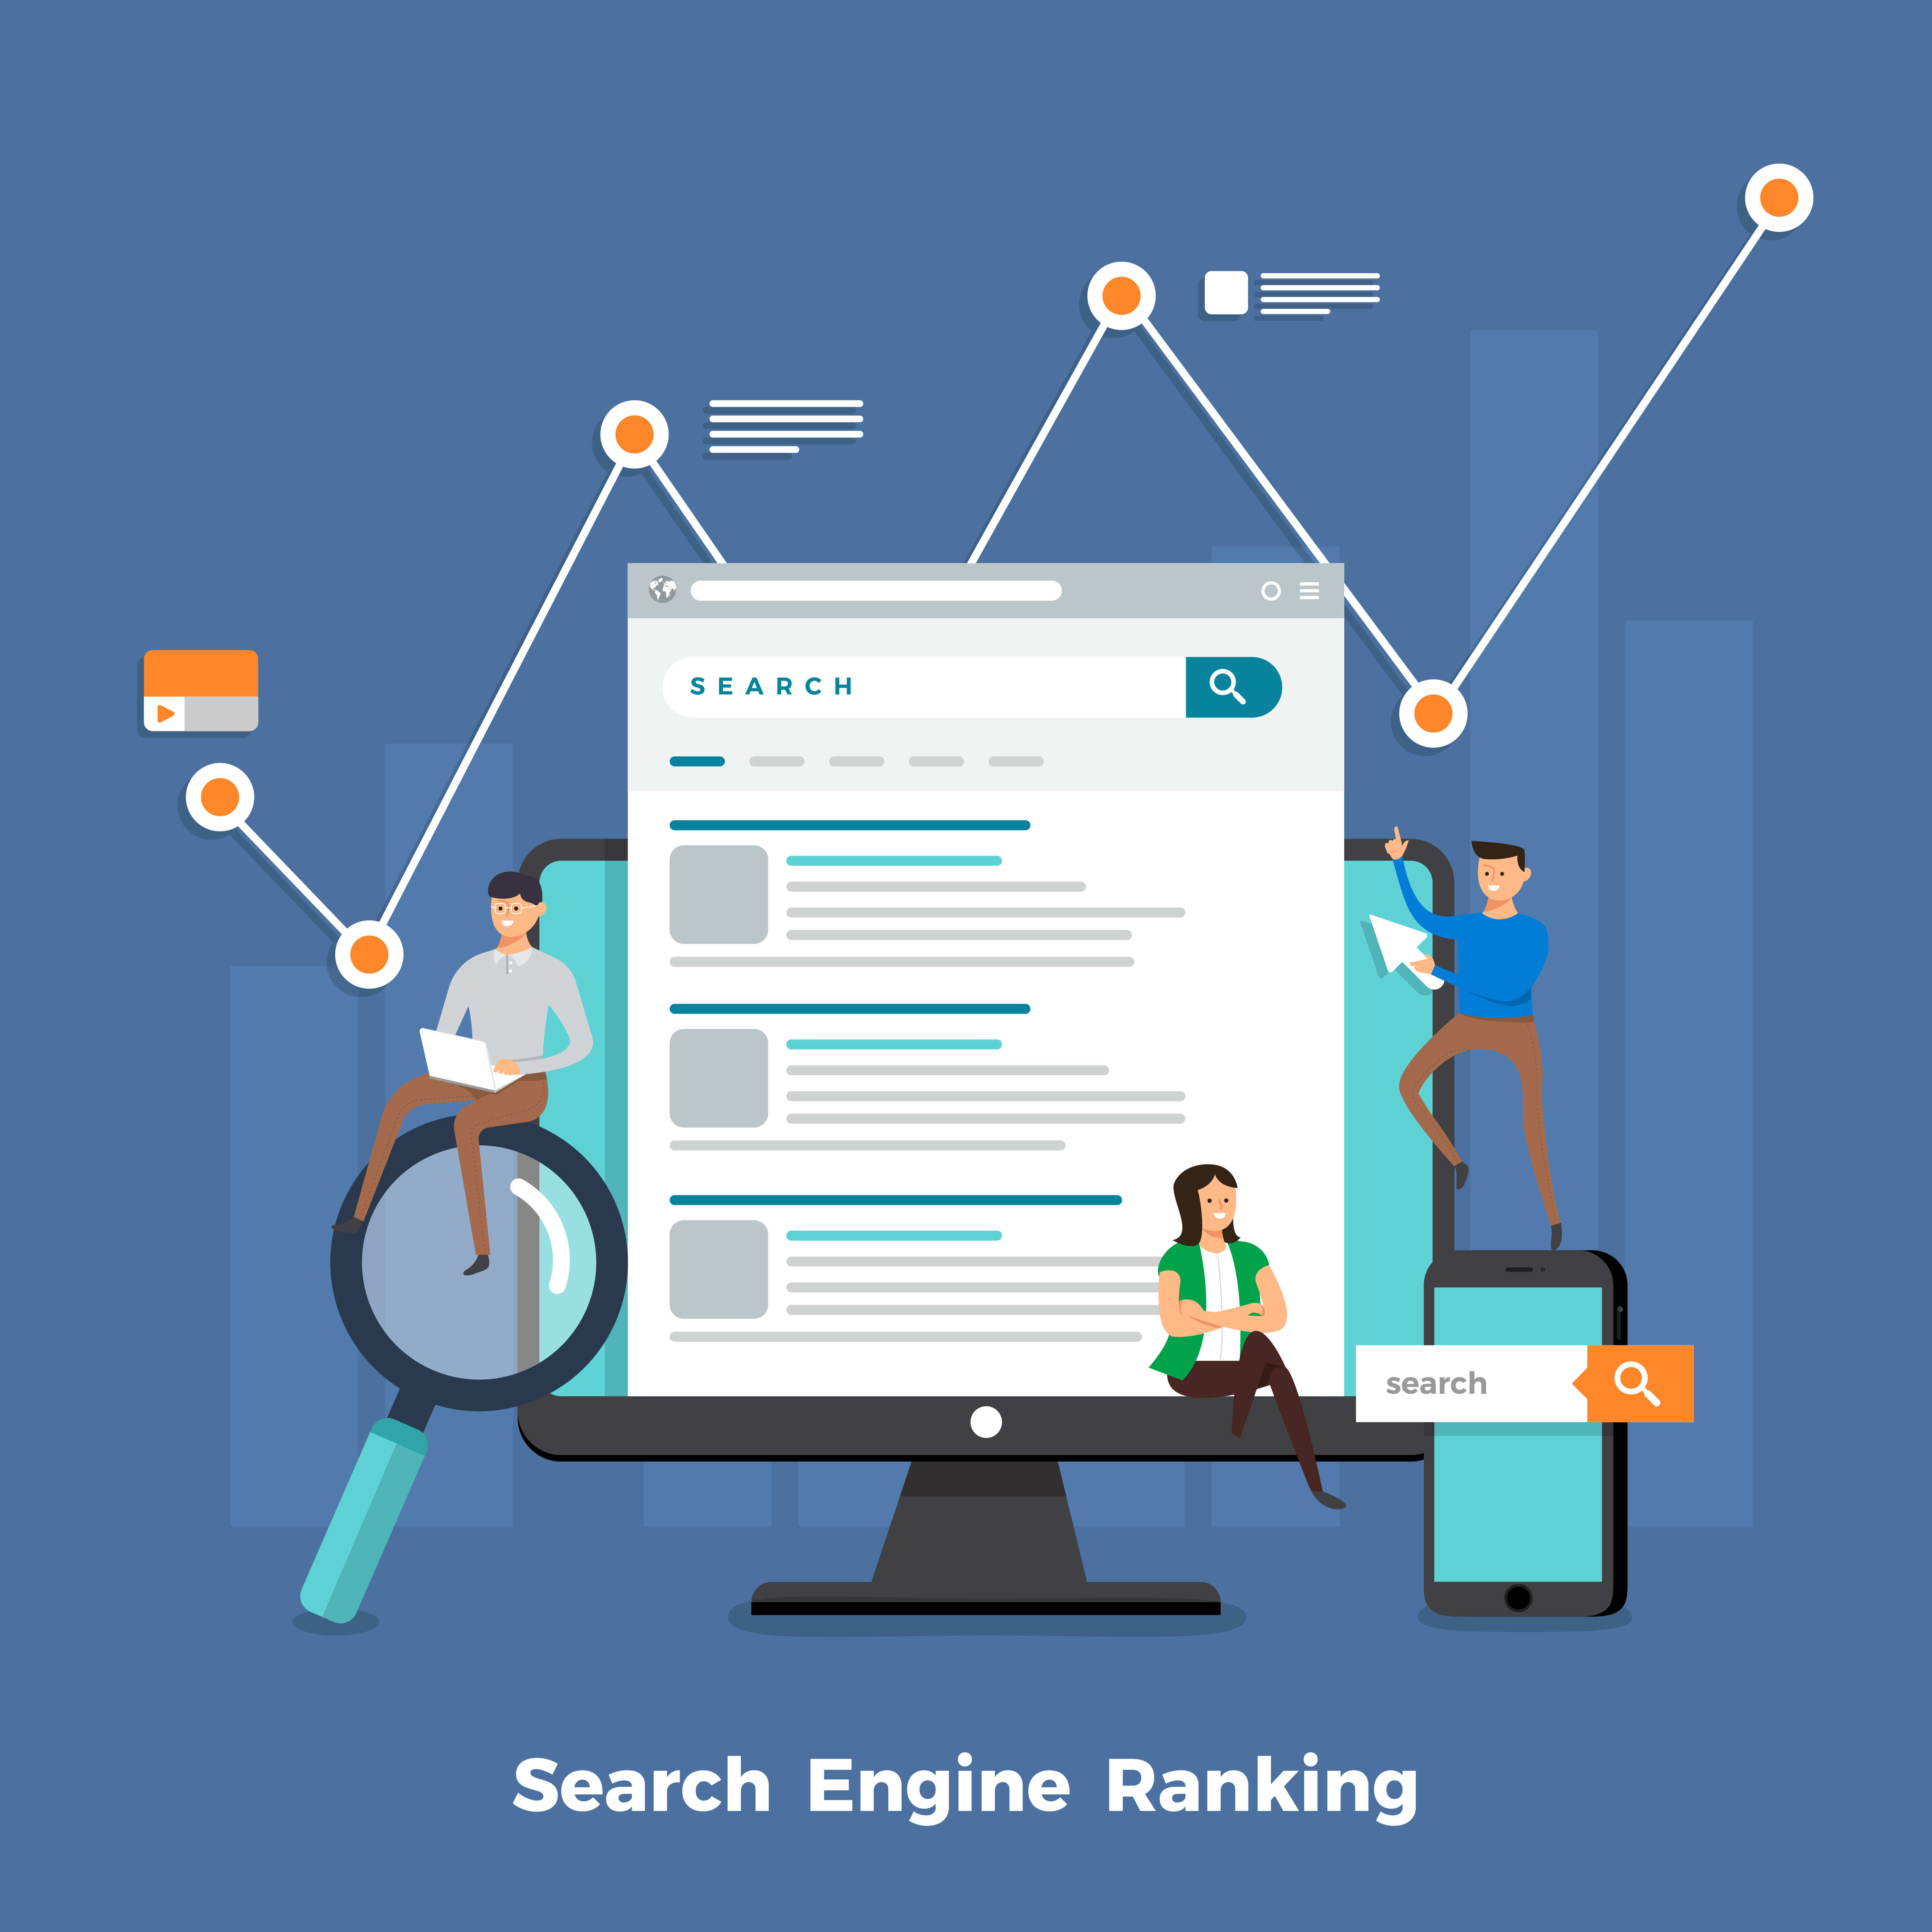 6 Easy SEO Tactics That'll Help Boost Your Rankings